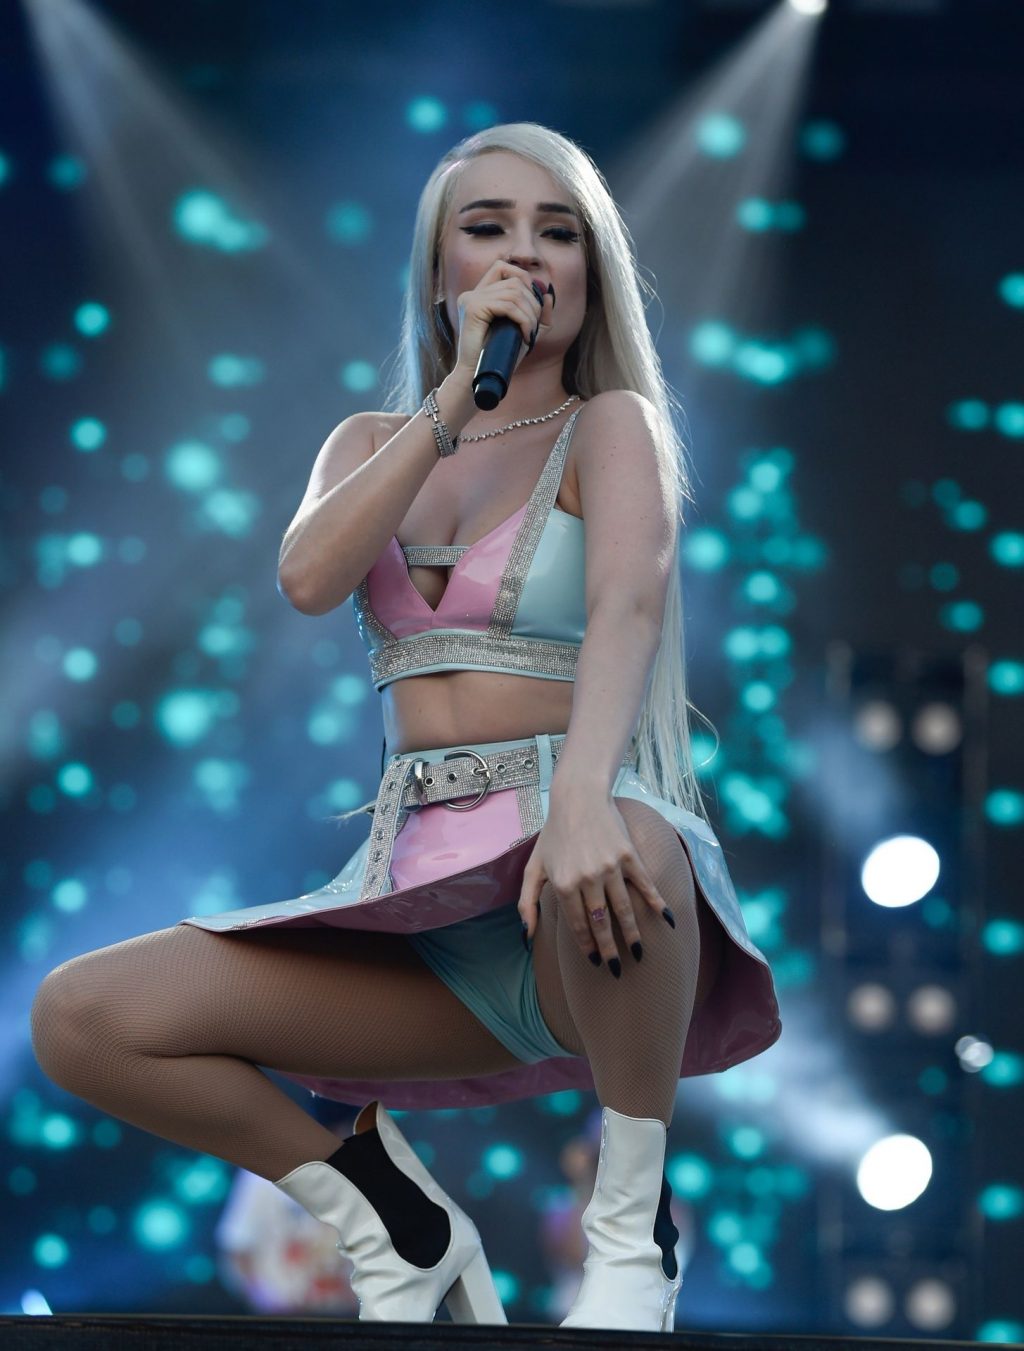 German singer-songwriter Kim Petras was photographed in a short dress